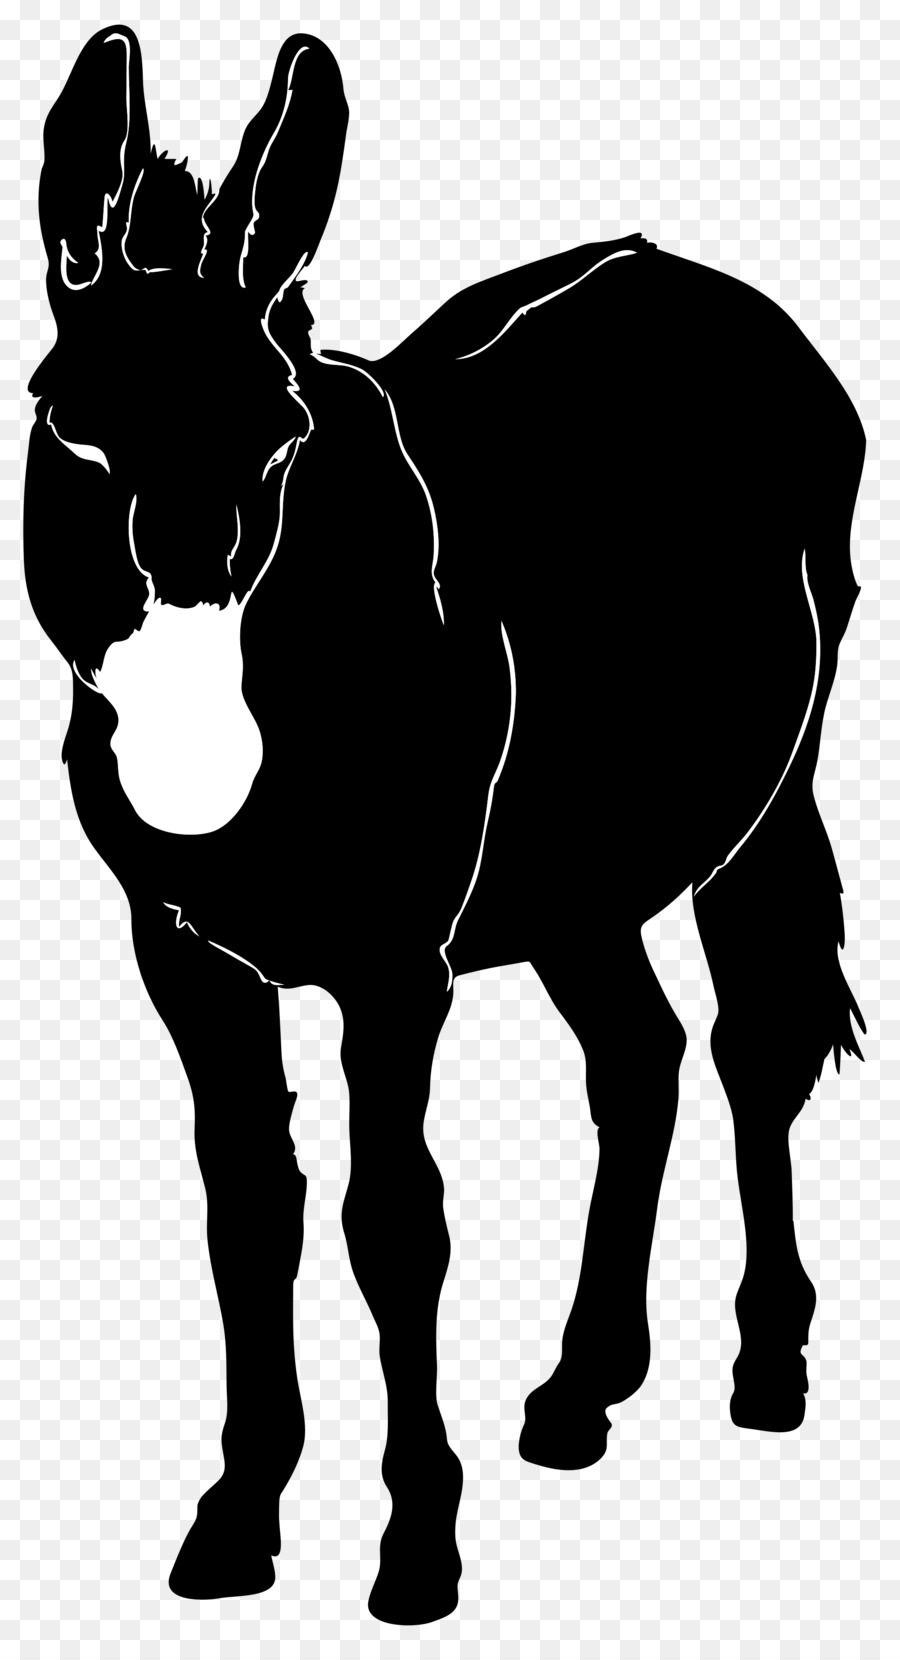 Silhouette Donkey Clip art - donkey png download - 2000*3647 - Free Transparent Silhouette png Download.